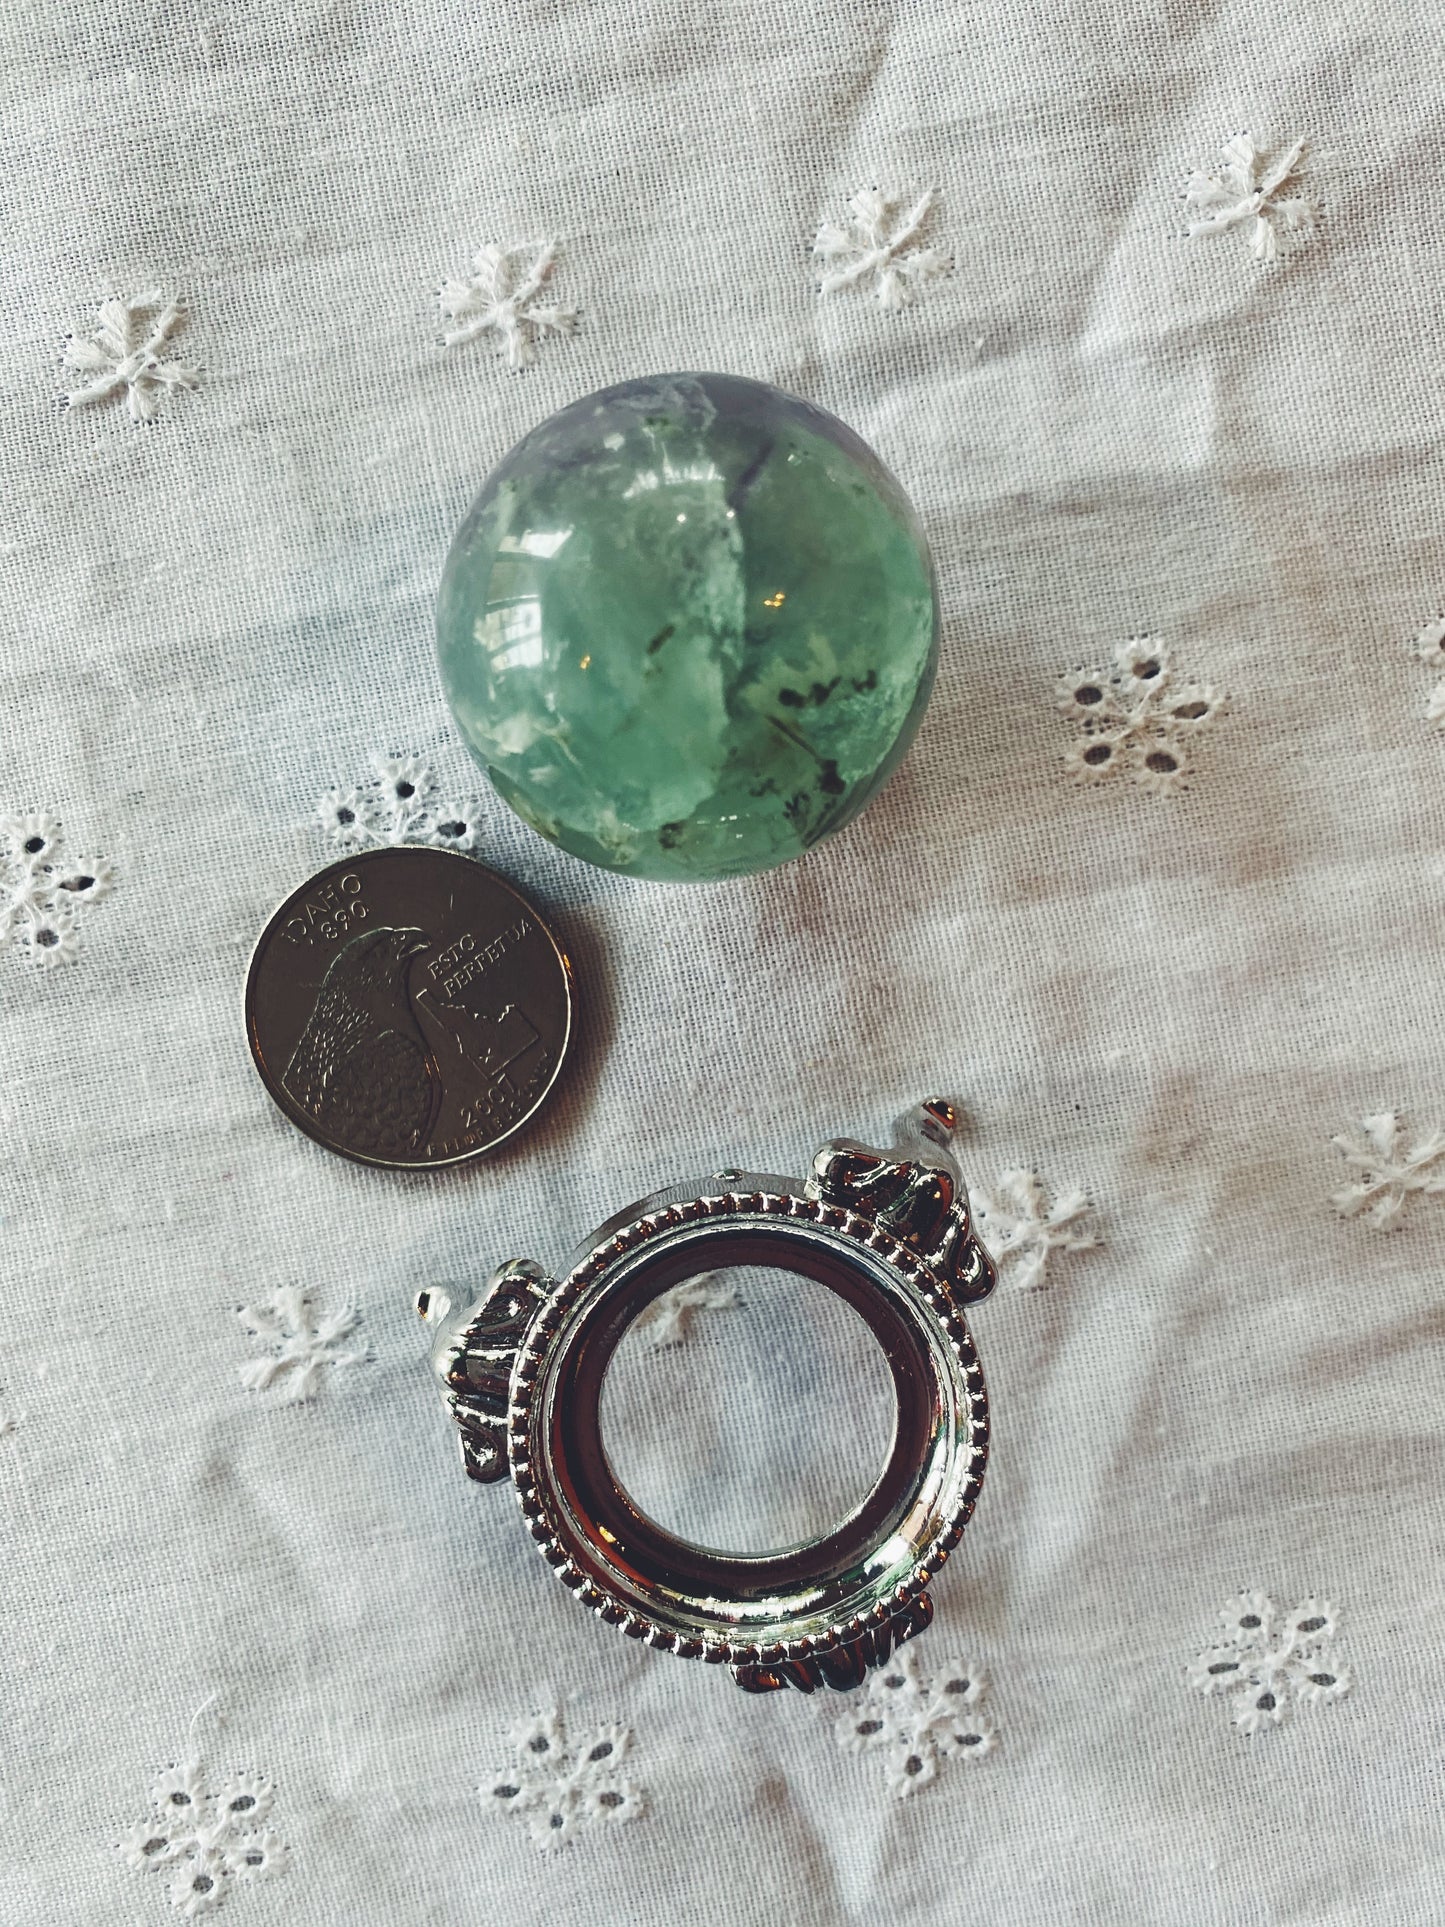 Small Fluorite Sphere with Stand